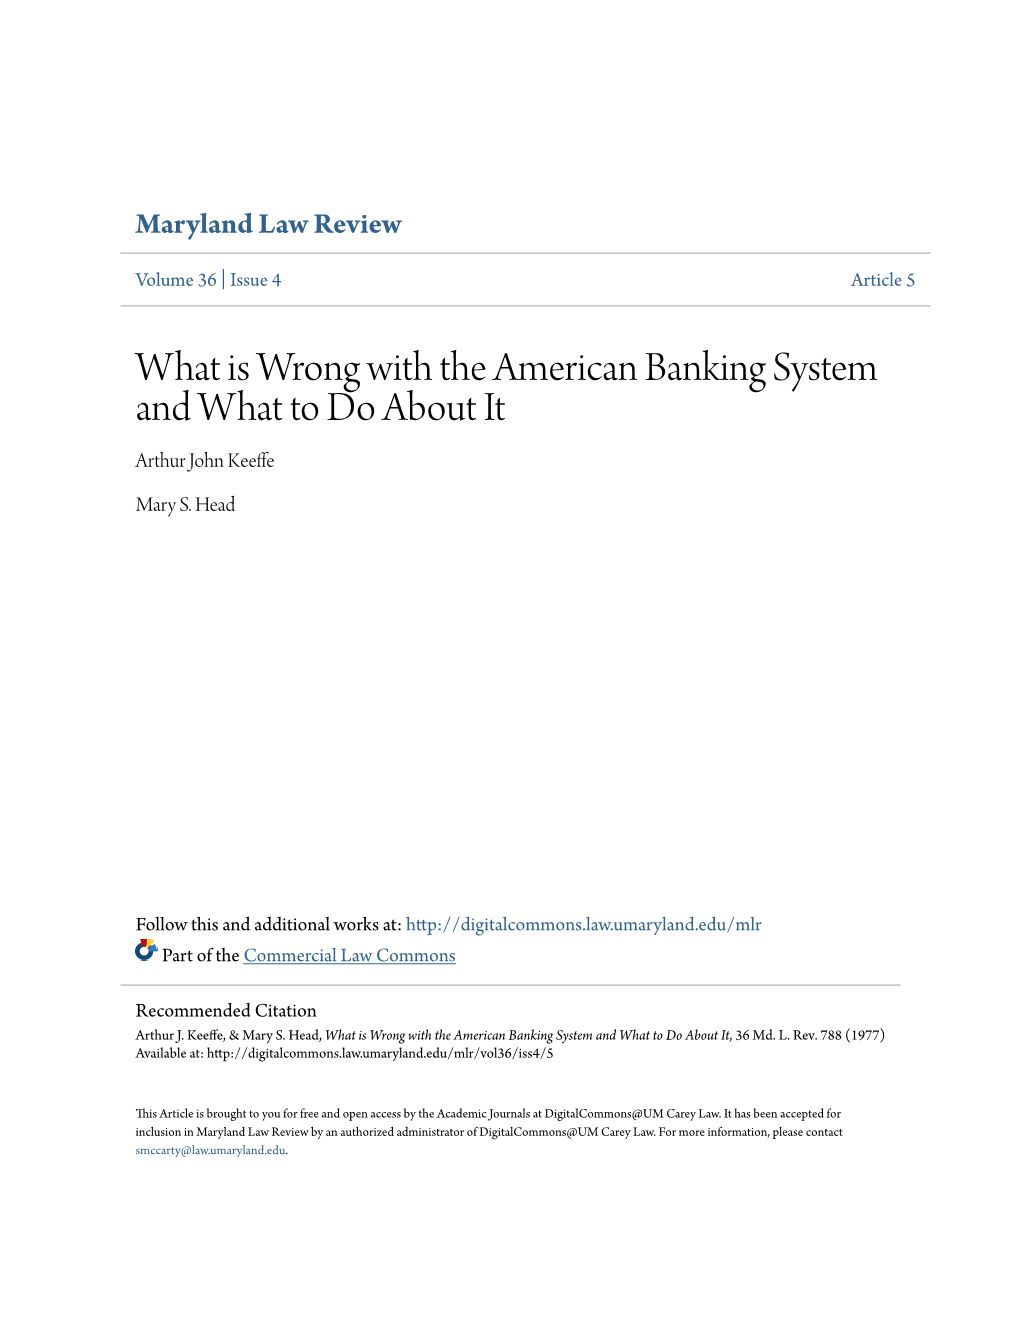 What Is Wrong with the American Banking System and What to Do About It Arthur John Keeffe